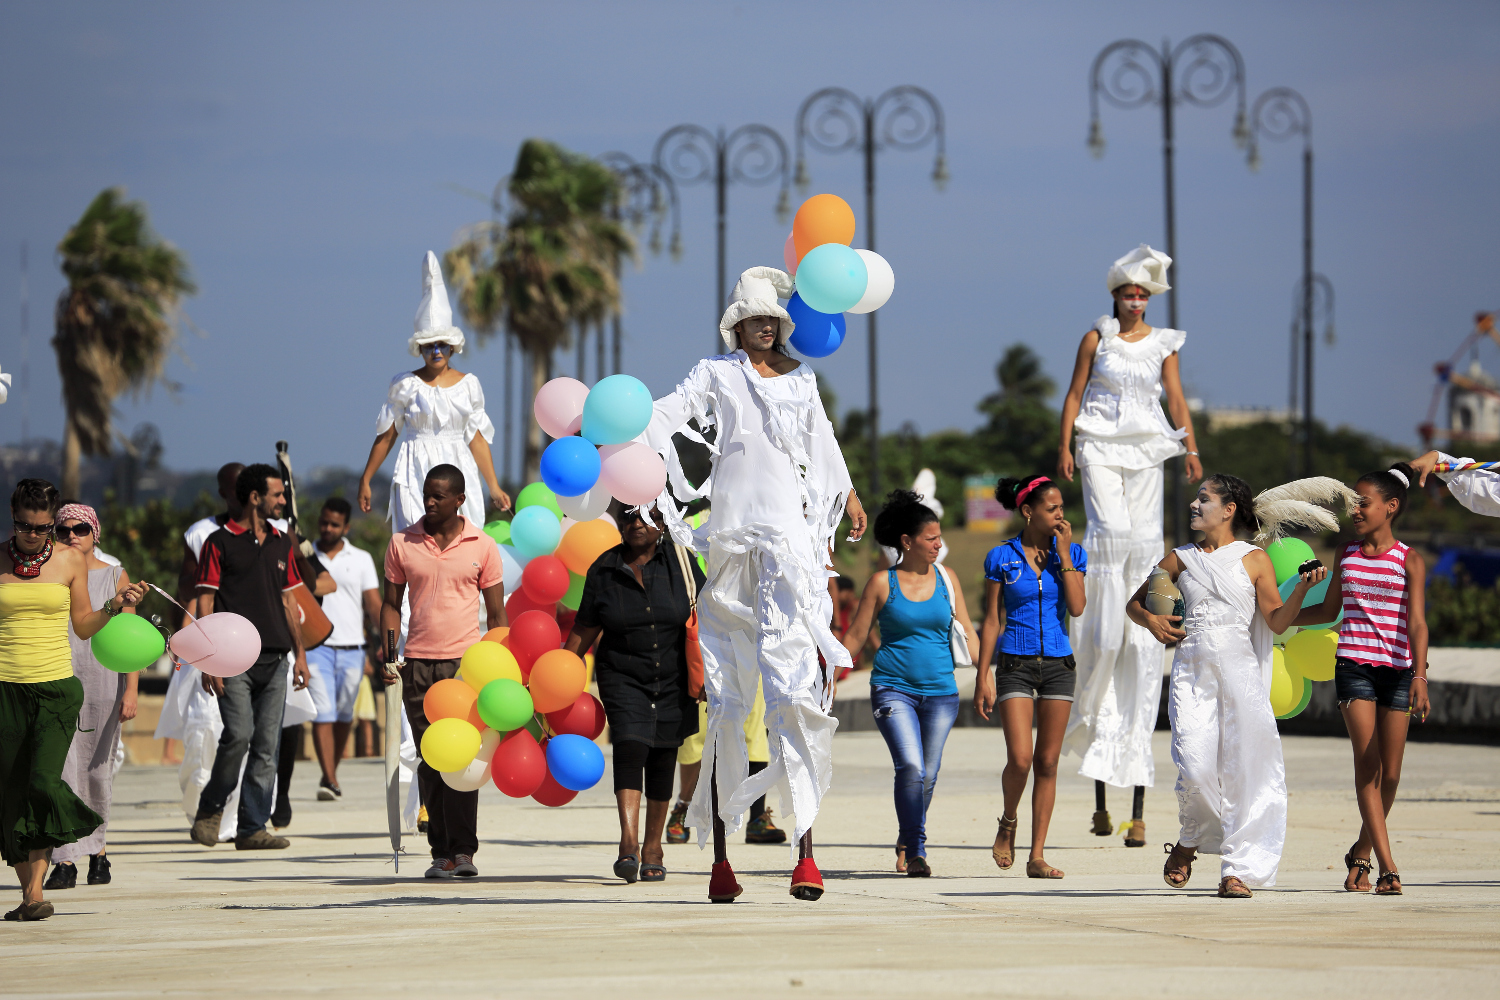 Theatrical performers on stilts will bamboozle the kids in dreamy Havana. Image by Bruce Yuanyue Bi / Lonely Planet Images / Getty